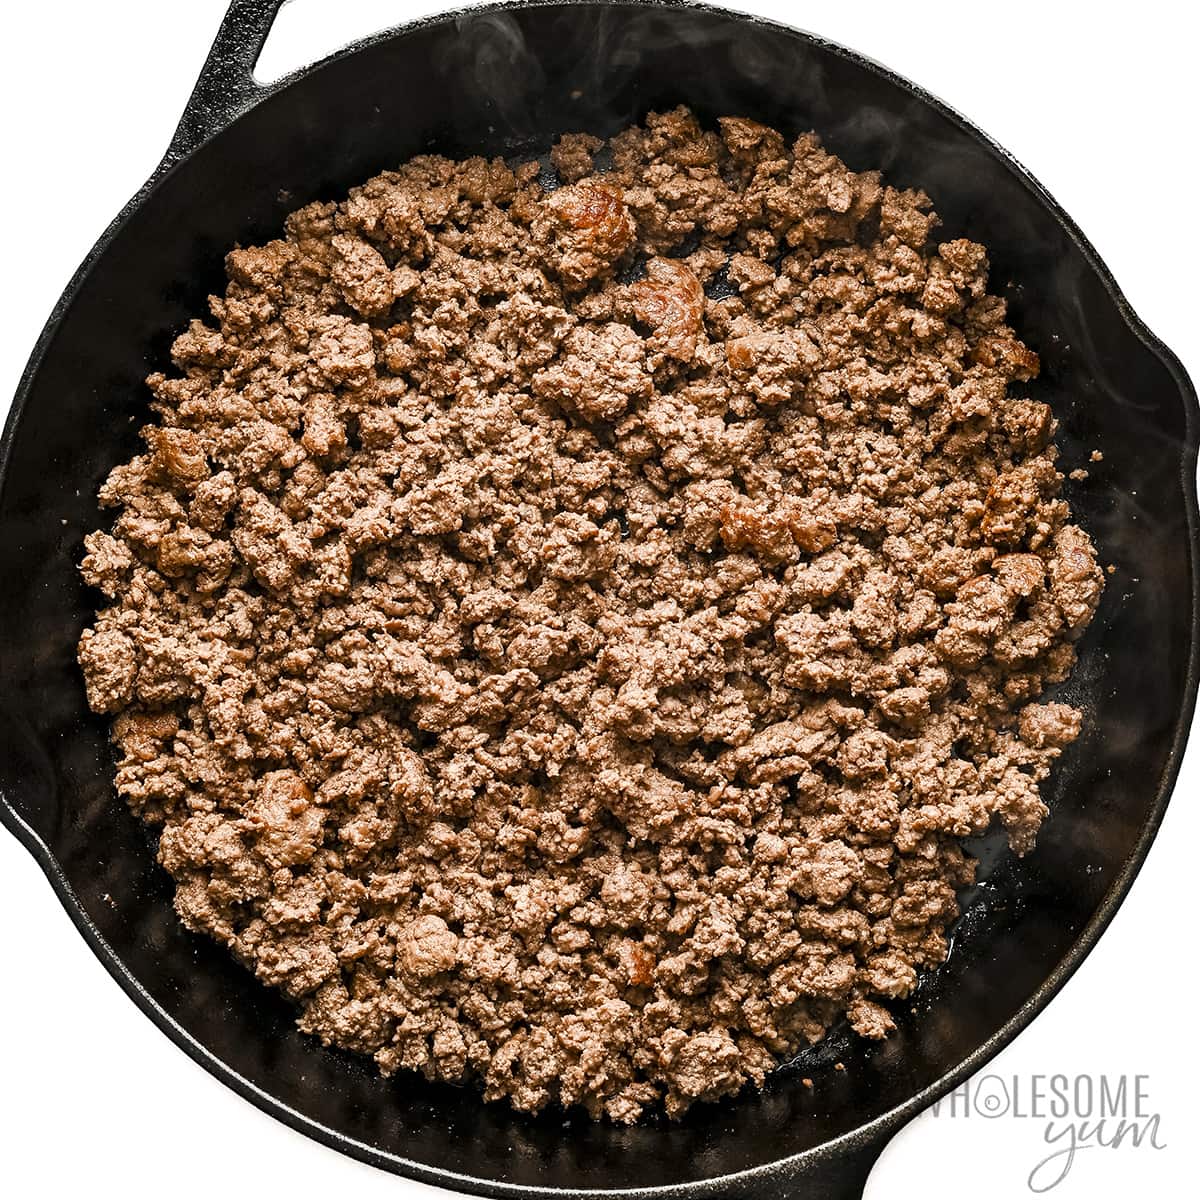 Add ground beef to skillet and brown until browned.